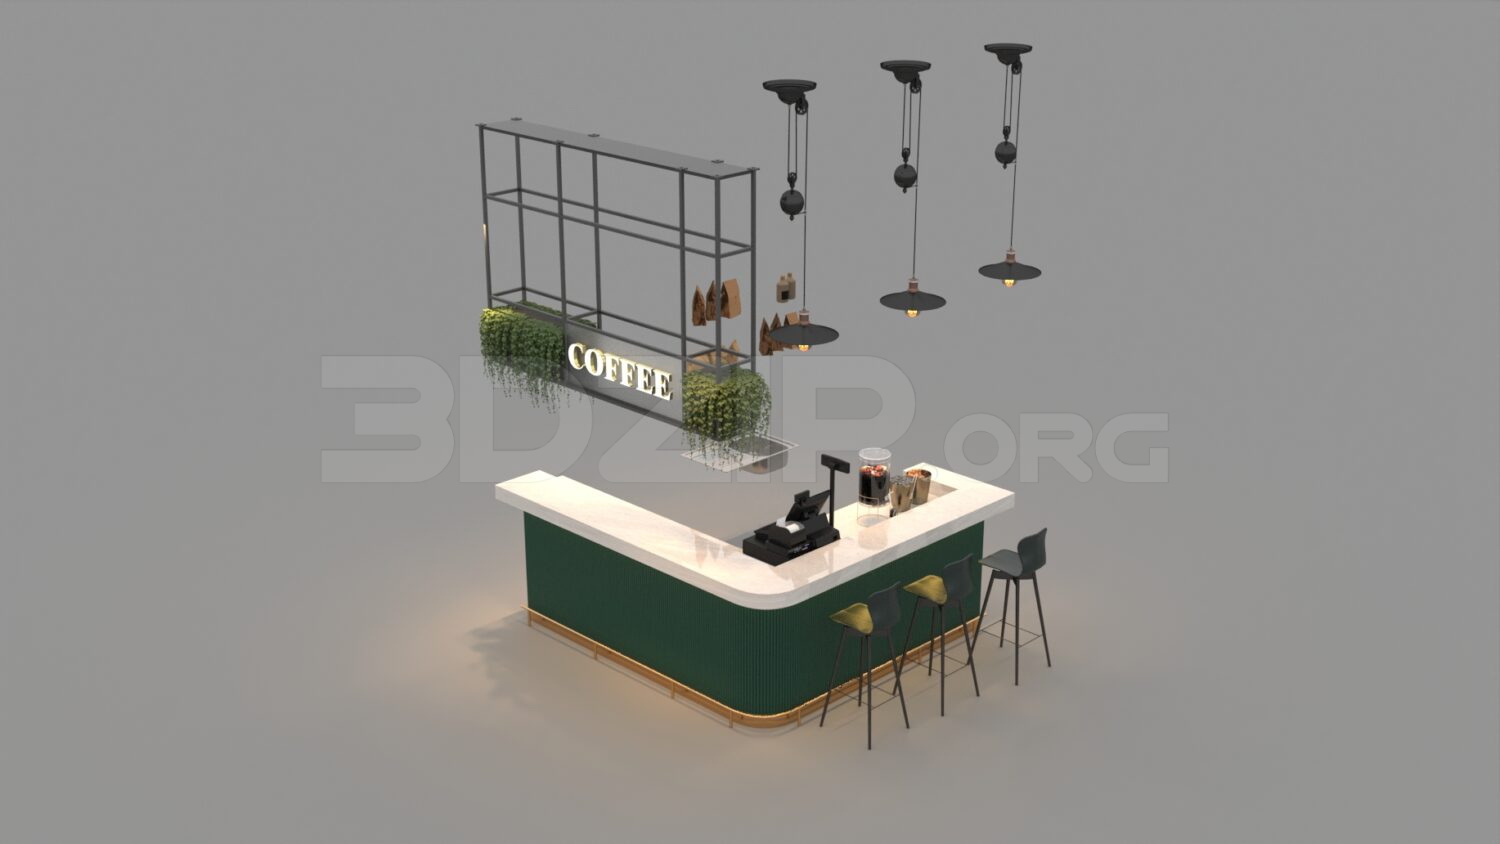 1271. Download Free Bar Model By Le Son